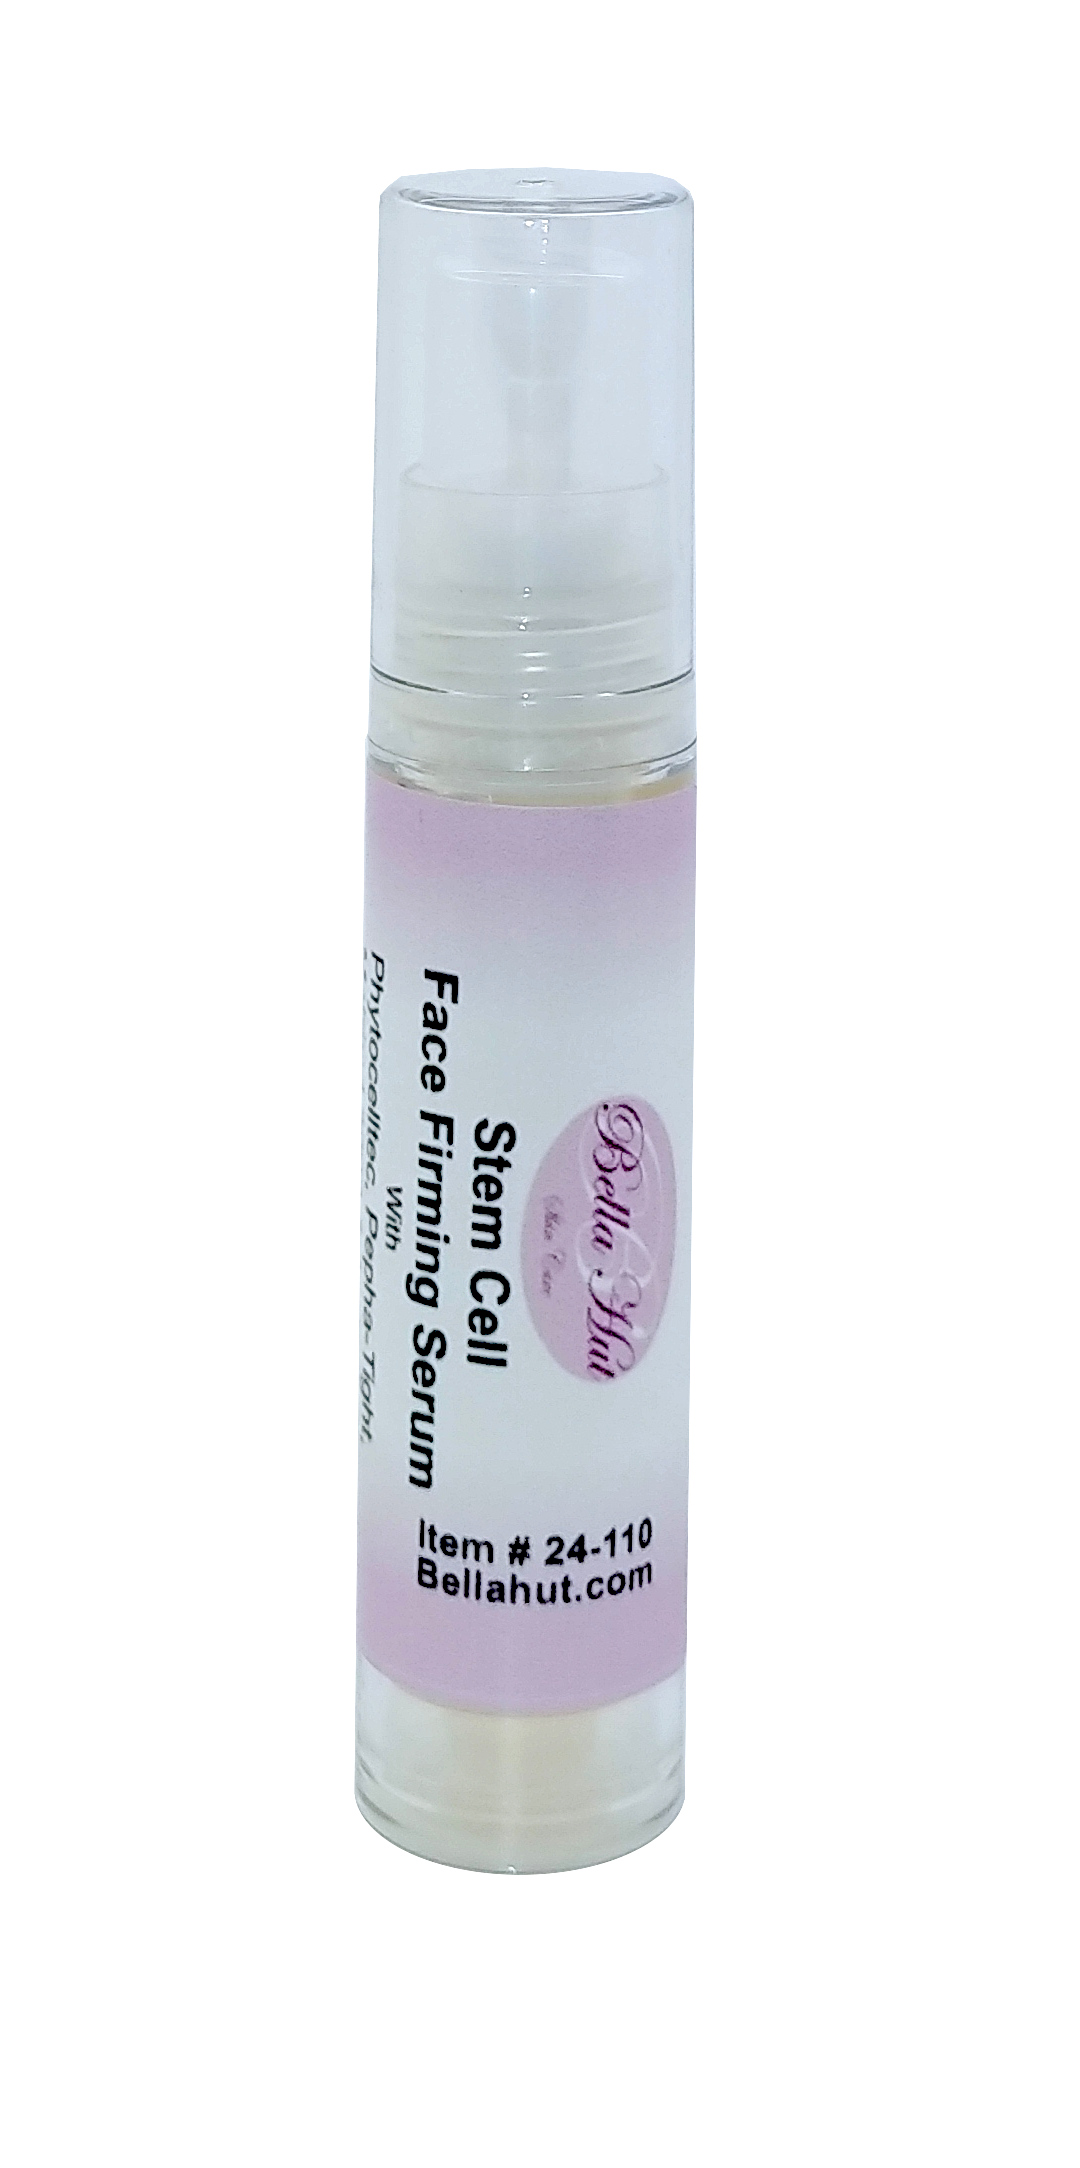 A ready to use stem cell treatment serum to help reduce wrinkles